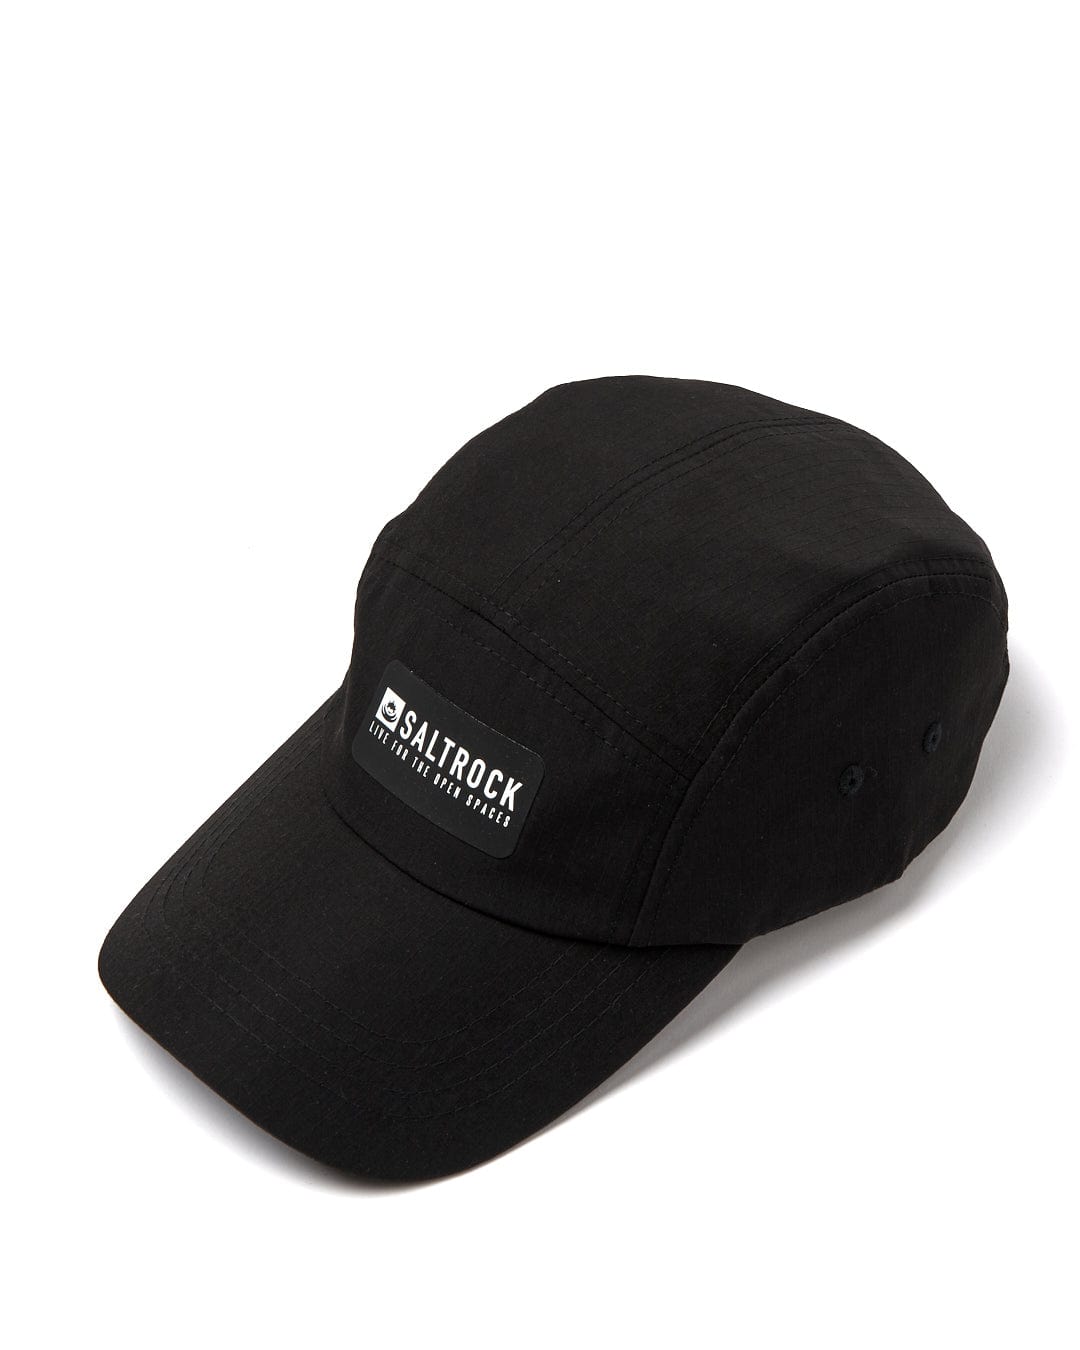 A black Gaitor 5 Panel UPF Cap with an adjustable strap by Saltrock.